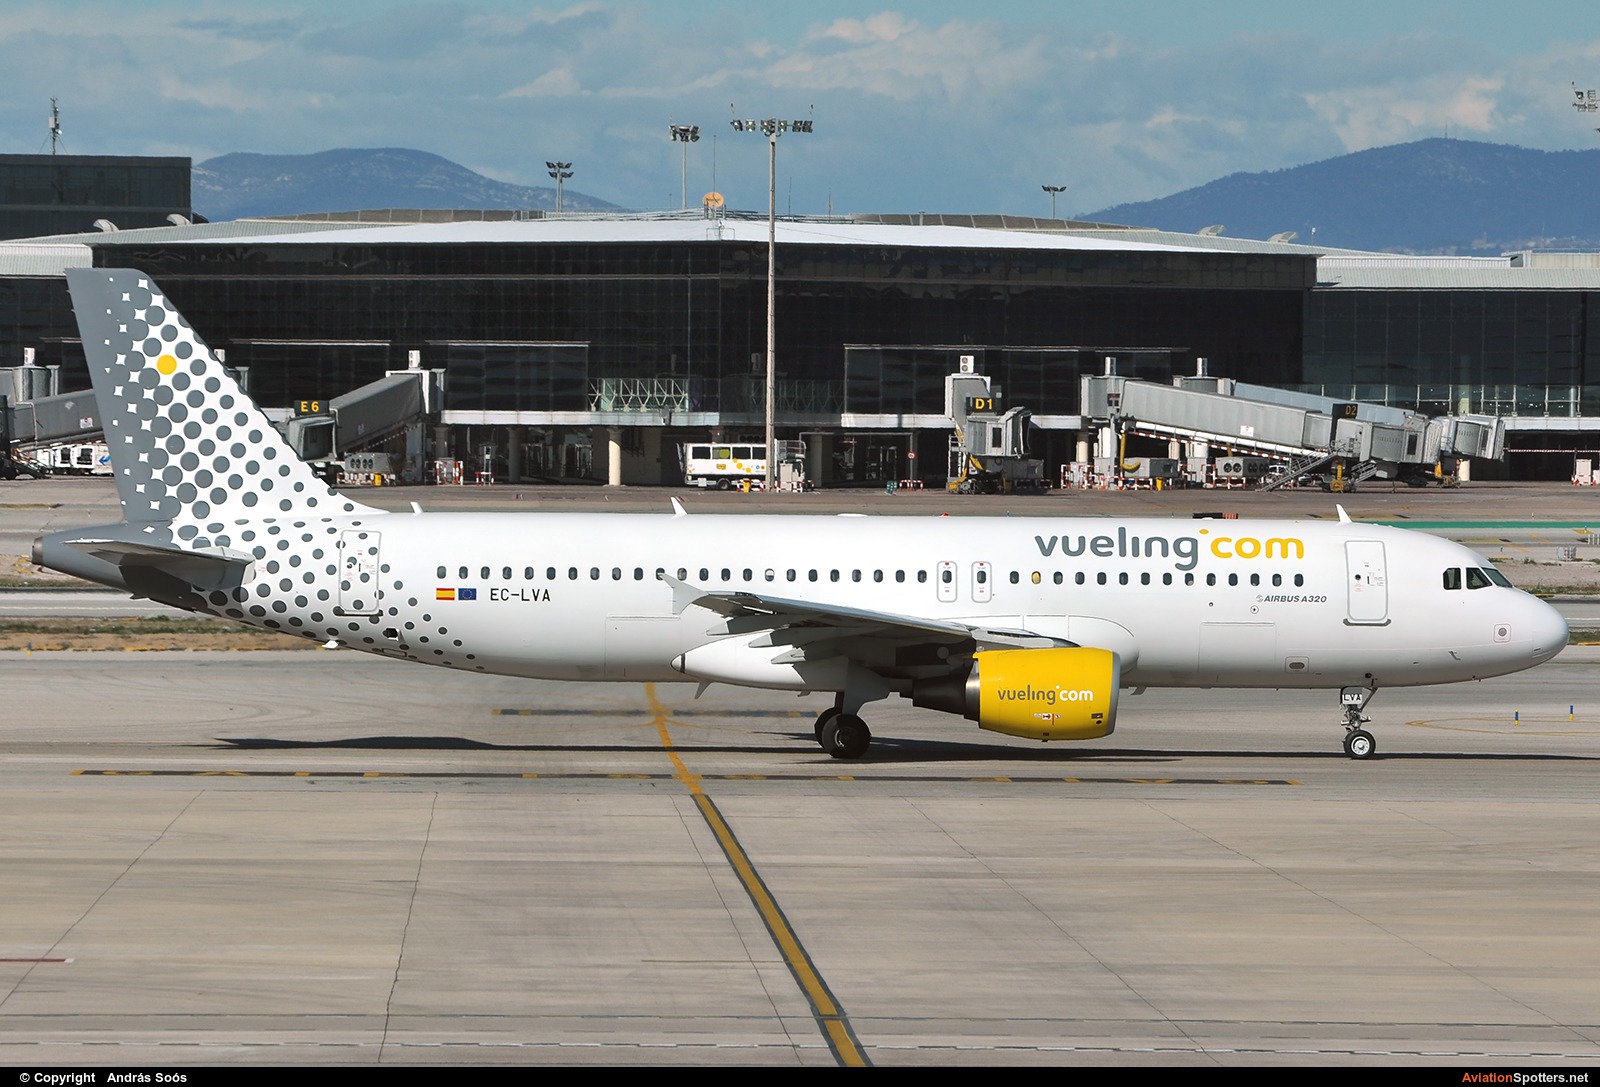 Vueling Airlines  -  A320  (EC-IVA) By András Soós (sas1965)